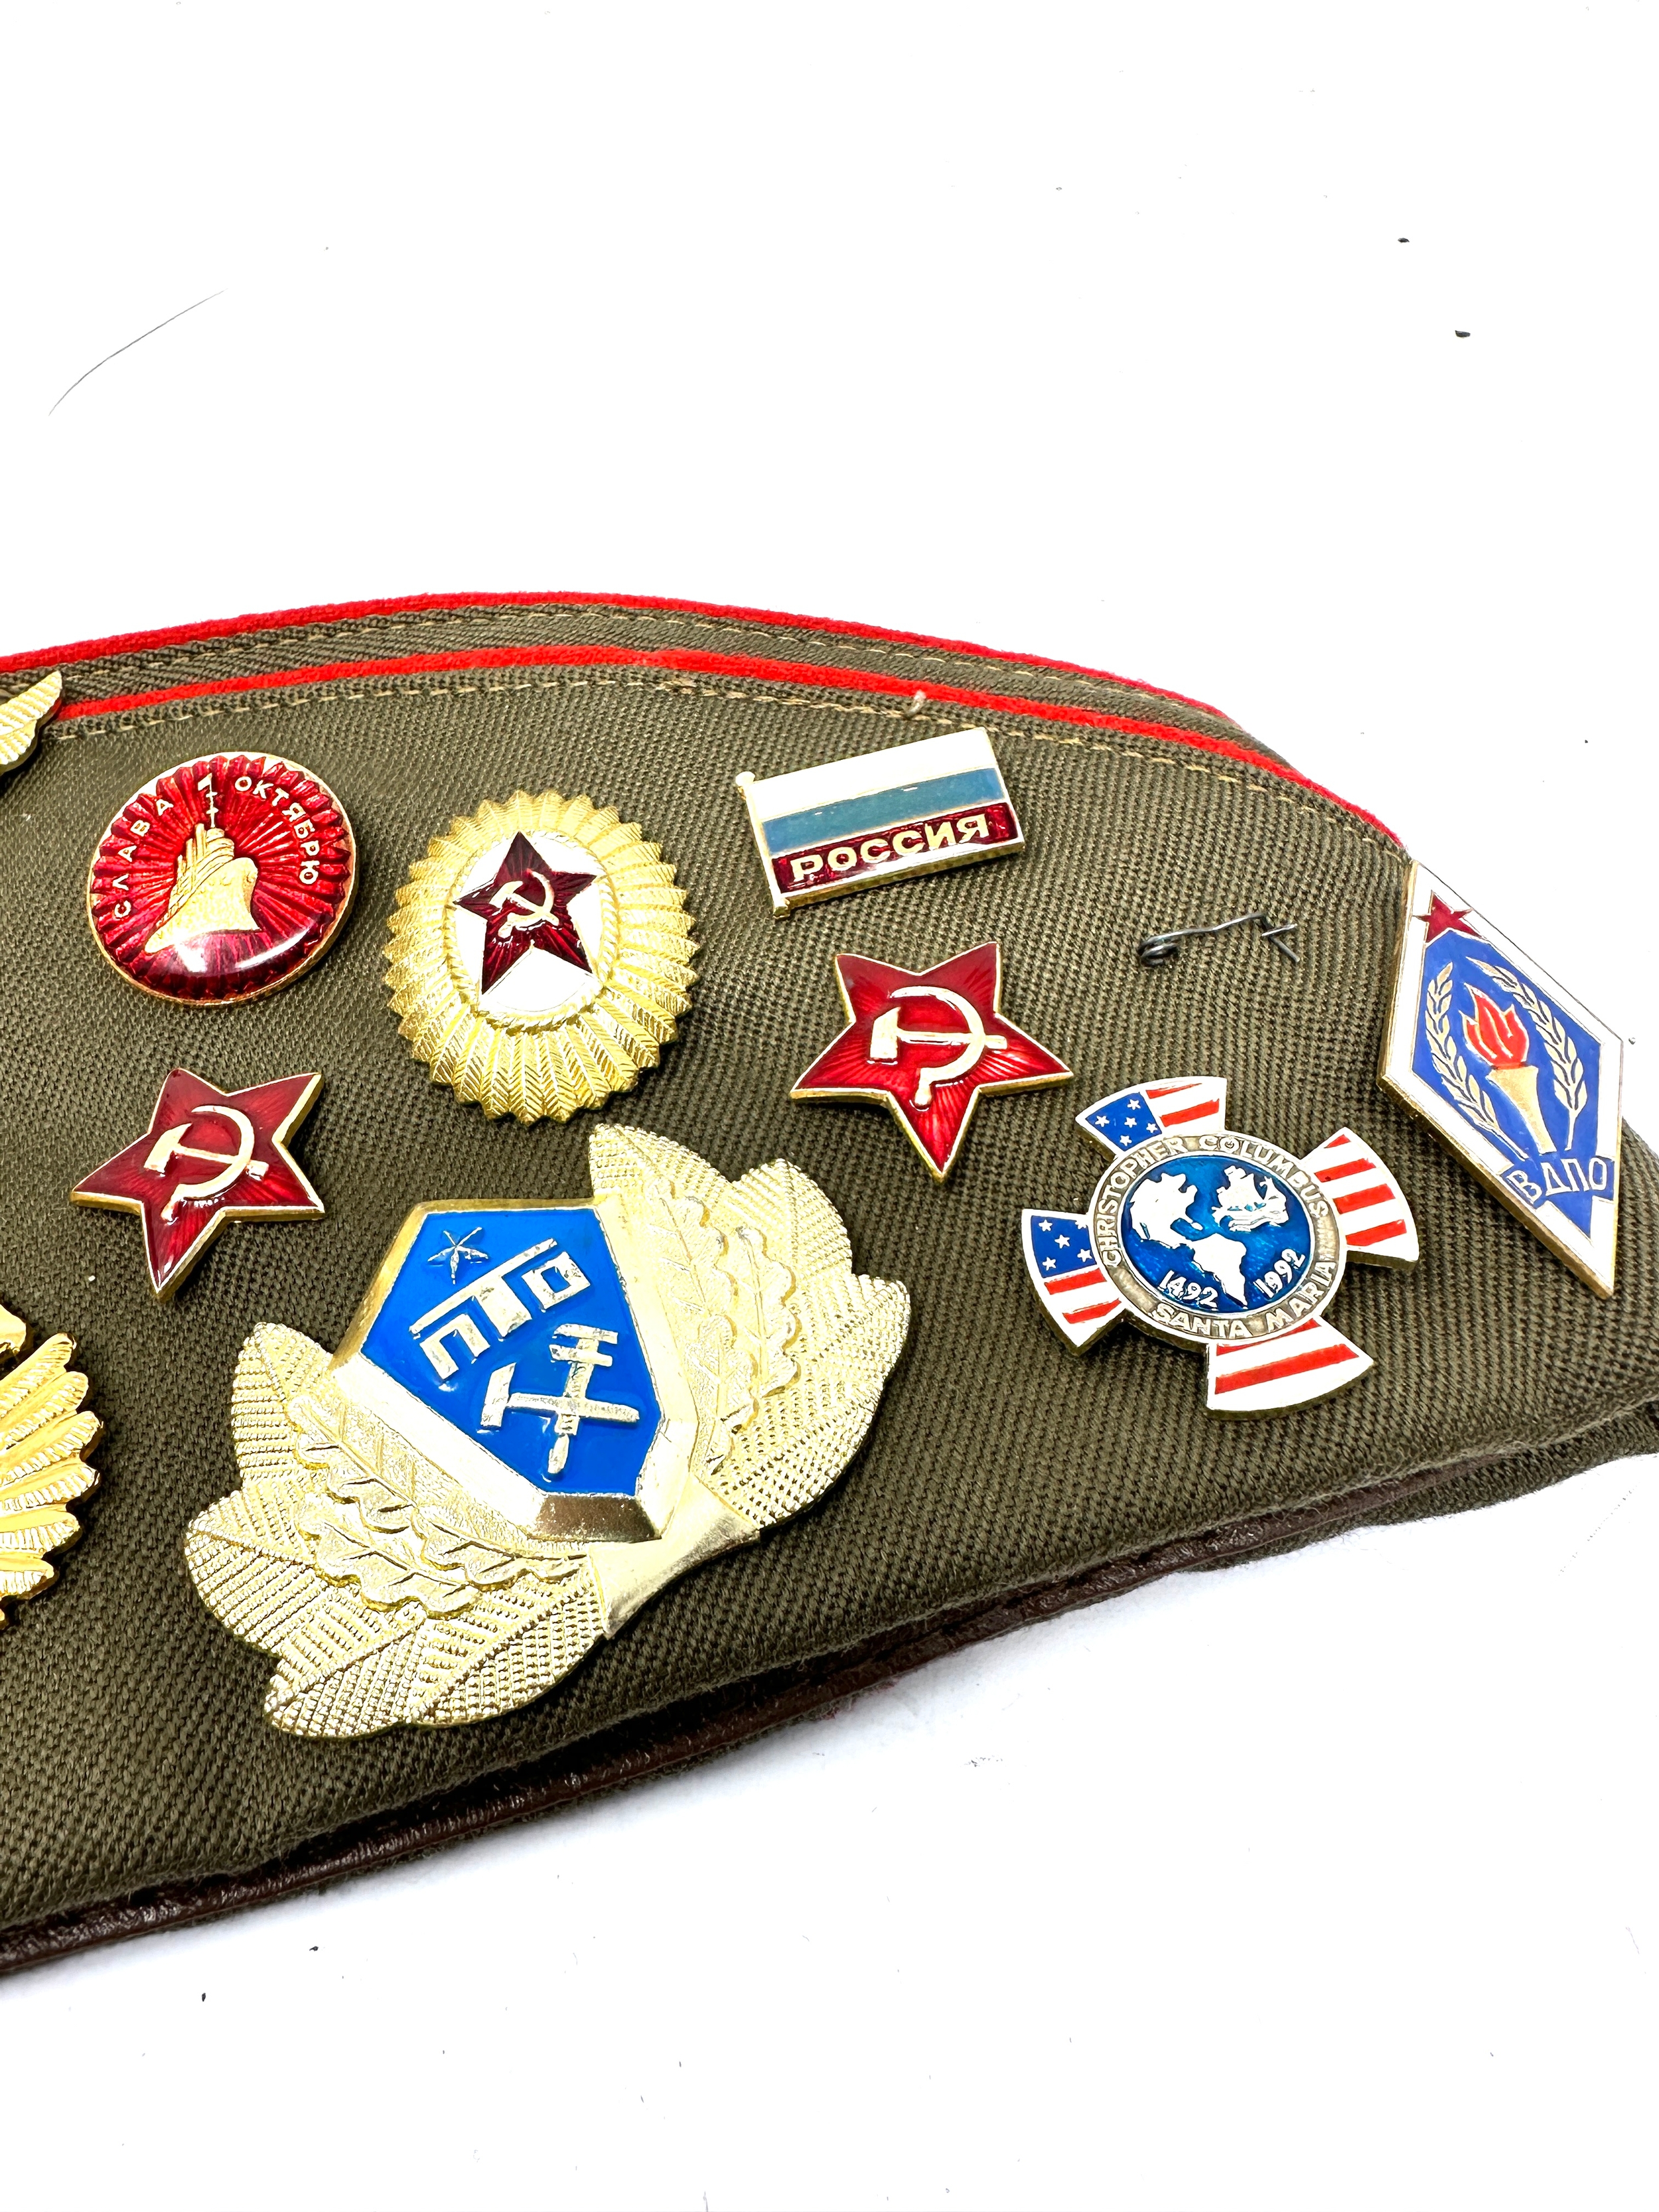 Russian soviet union cap with badges - Image 4 of 6